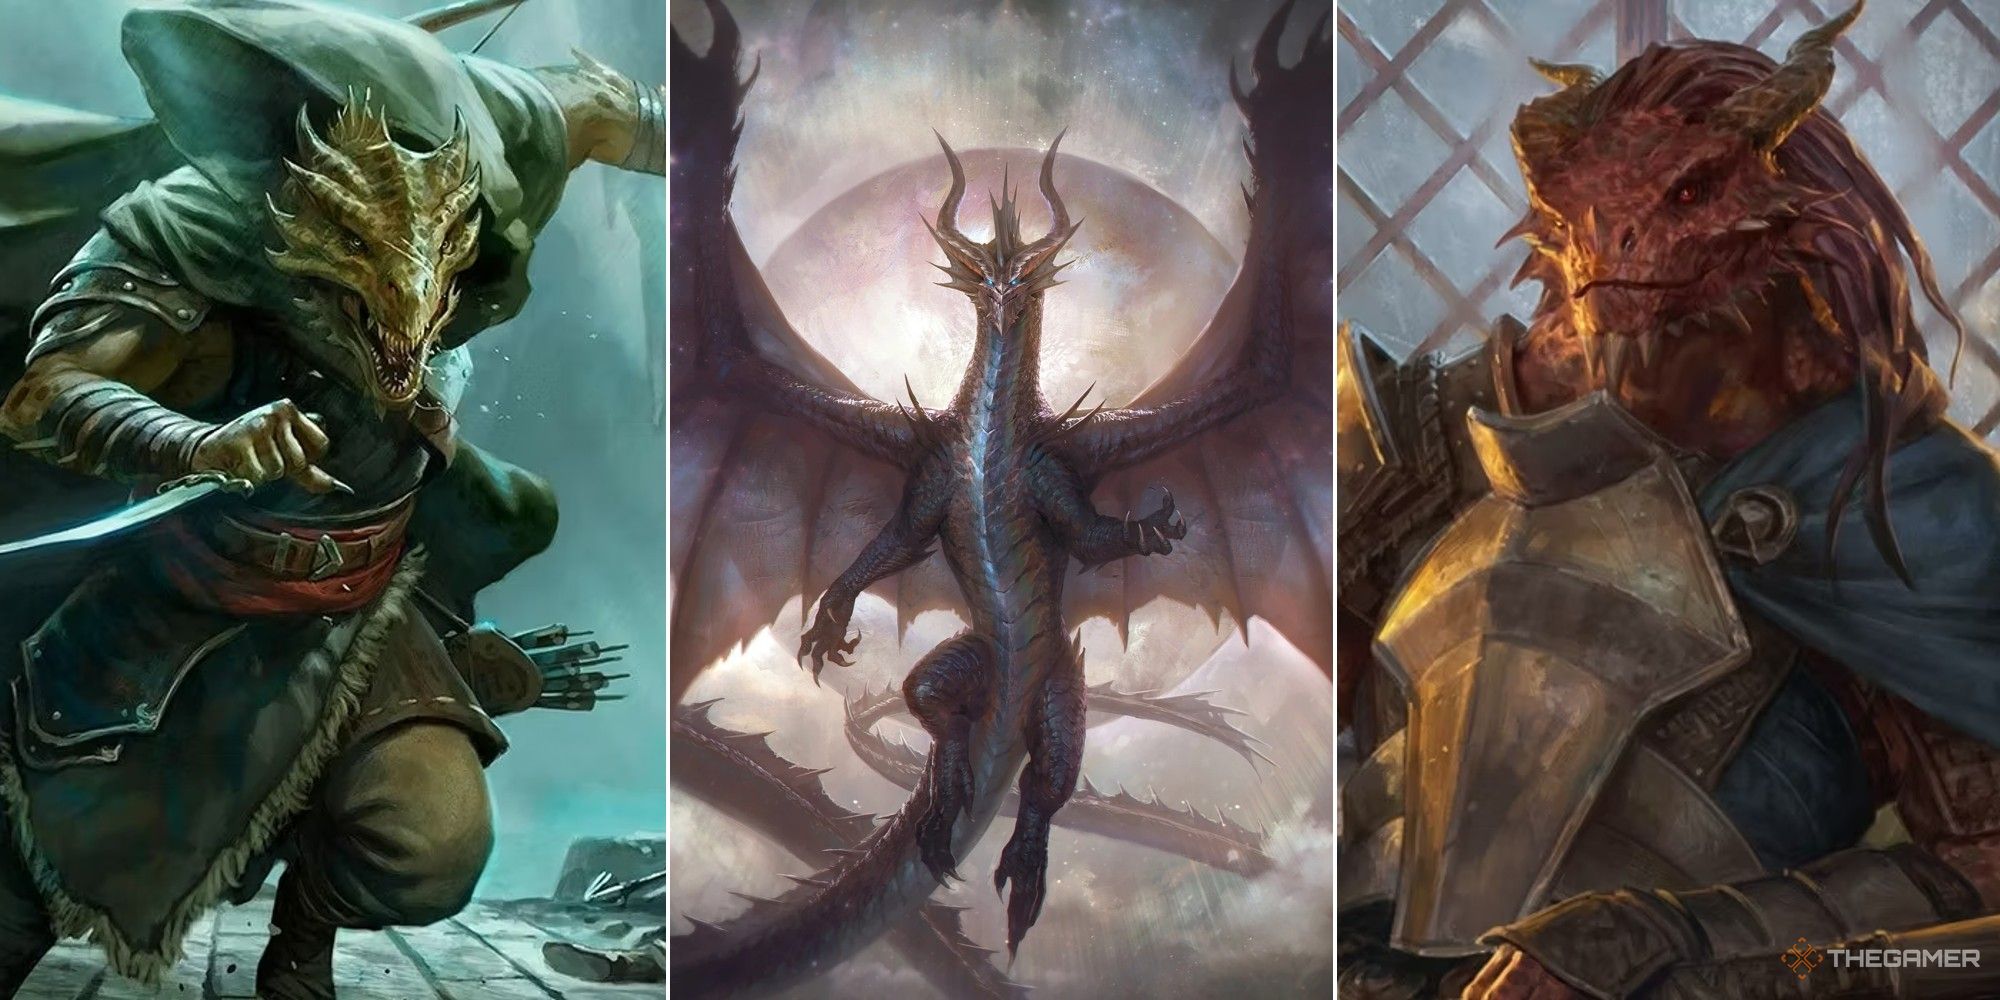 Dungeons & Dragons collage showing a rogue Dragonborn, Io the dragon god, and a warrior Dragonborn